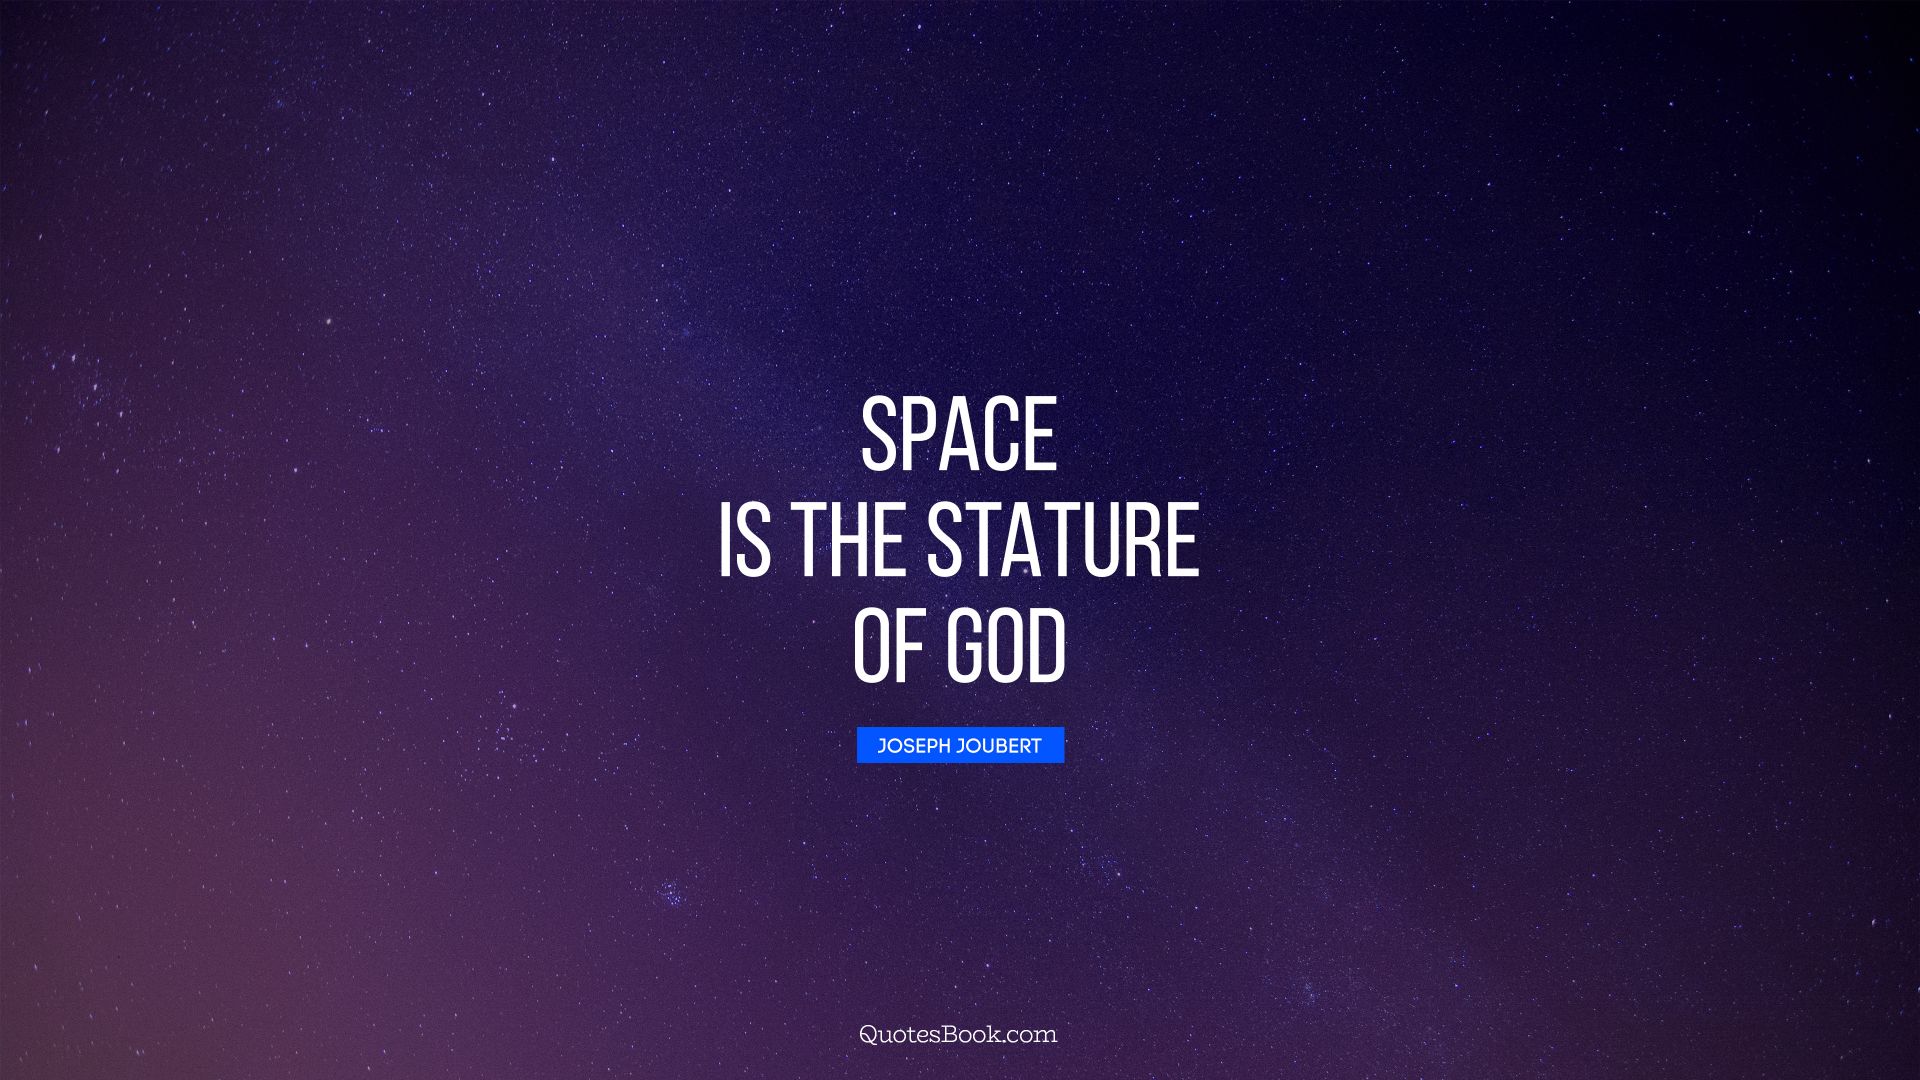 Space is the stature of God. - Quote by Joseph Joubert